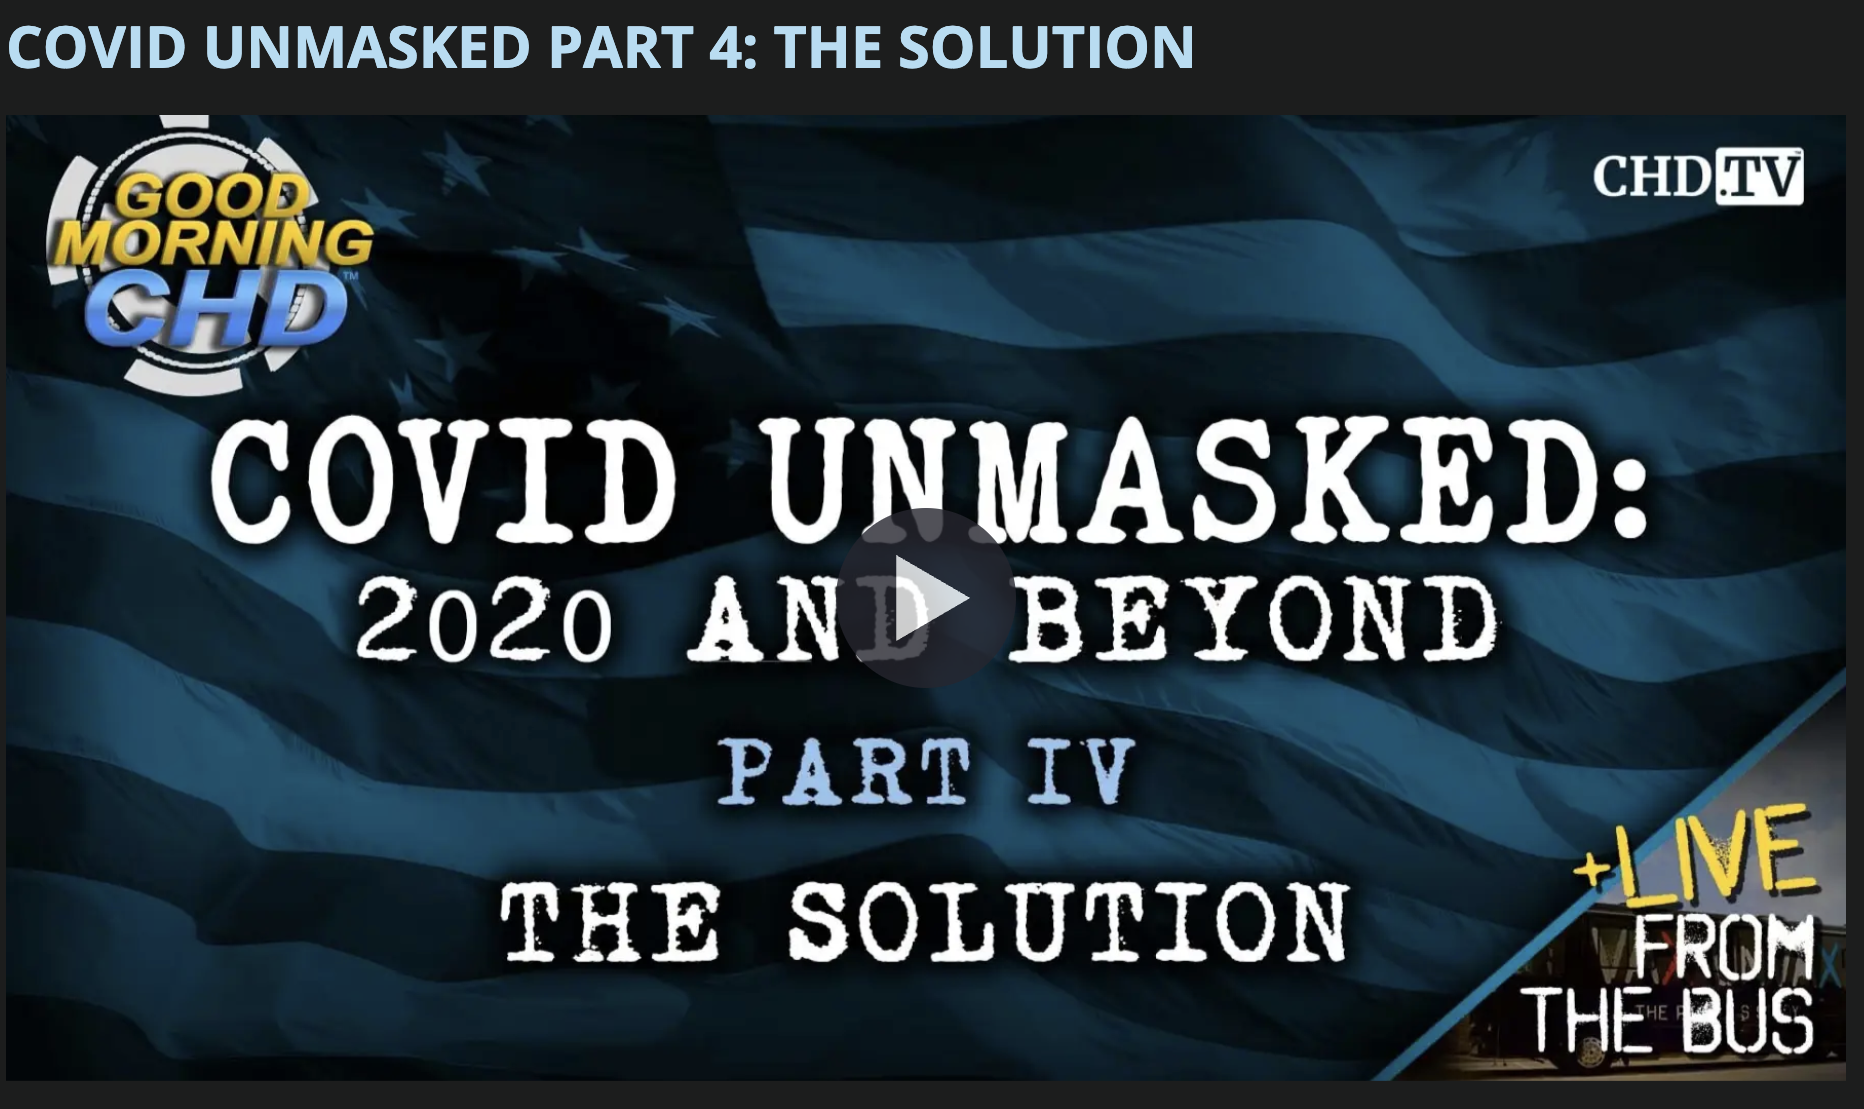 COVID UNMASKED PART 4: THE SOLUTION At 8PM ET